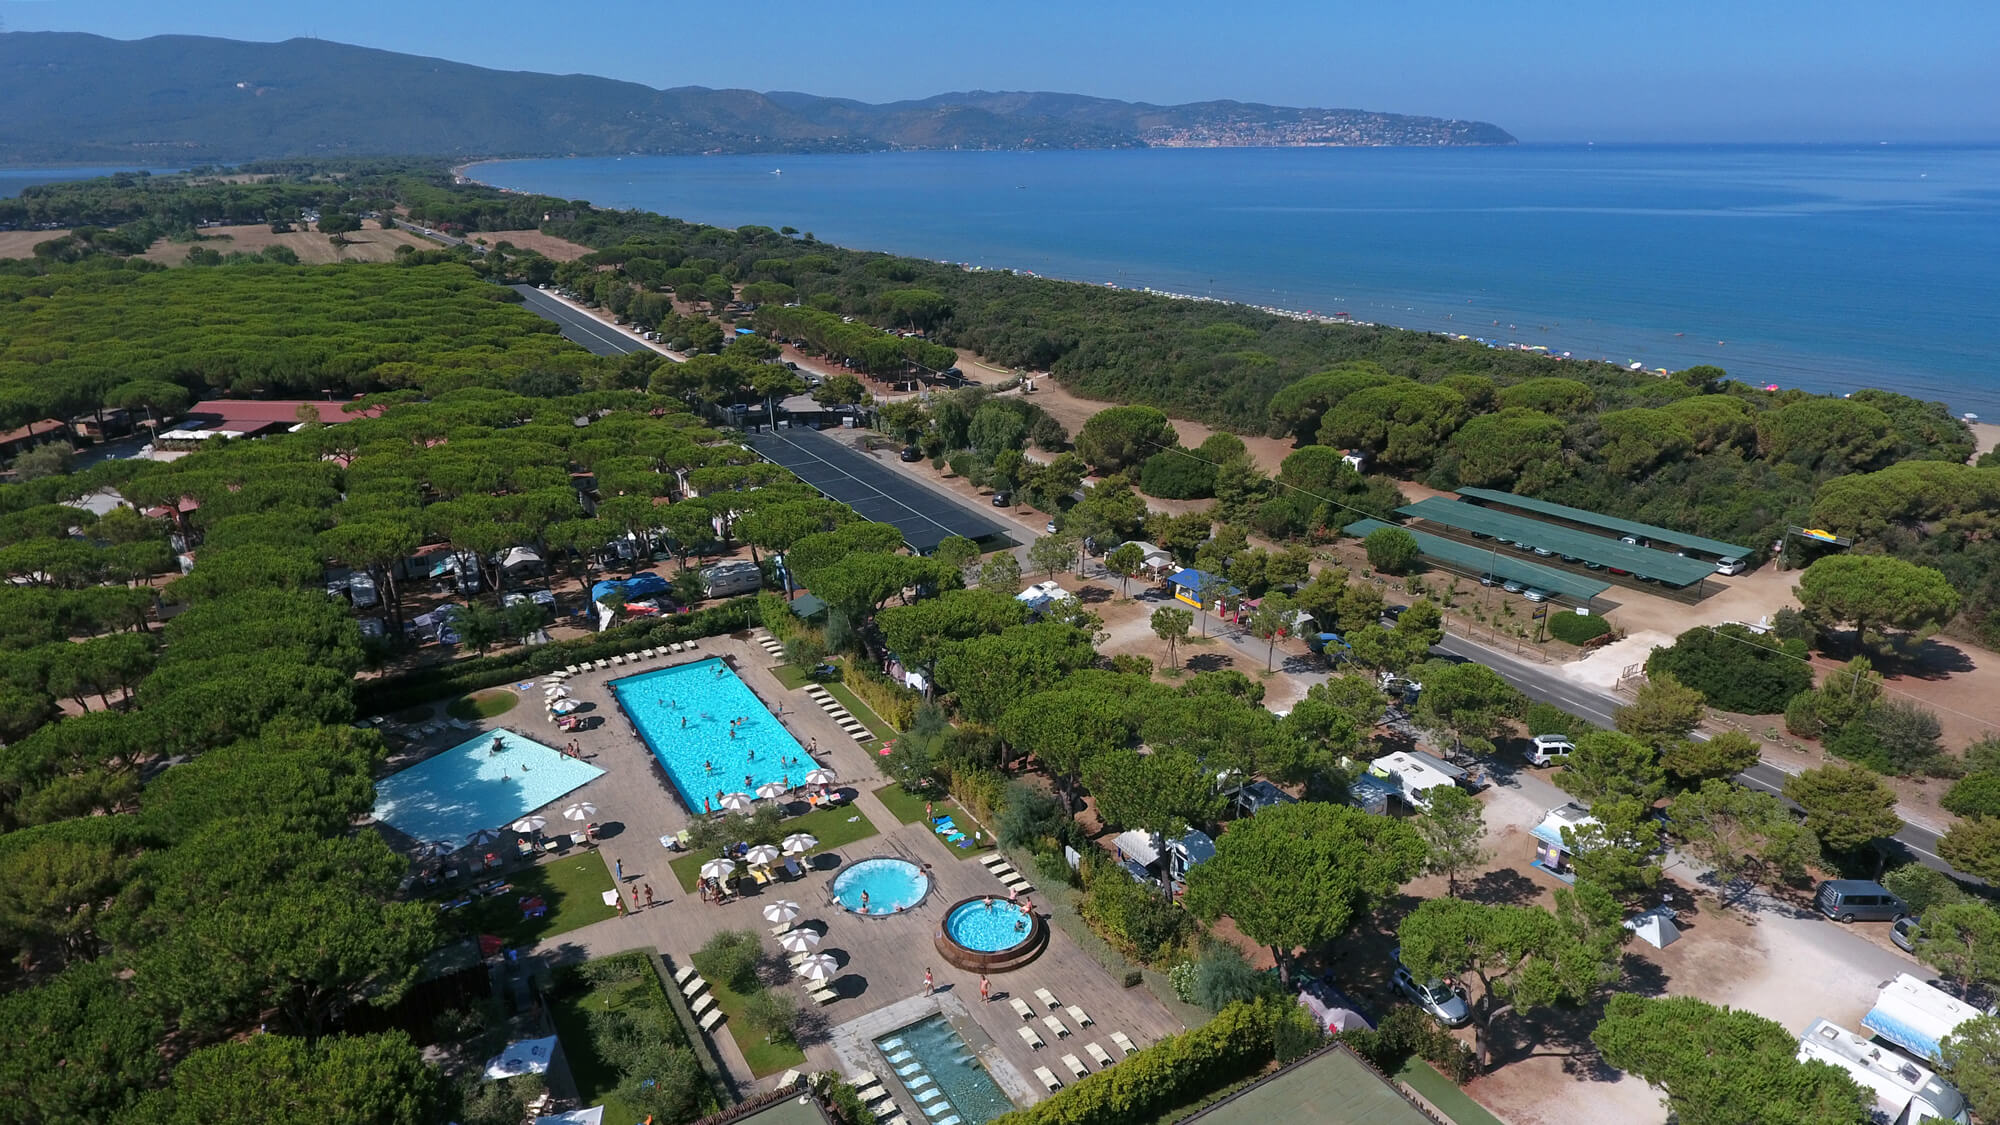 All the information you need about Orbetello Family Camping Village